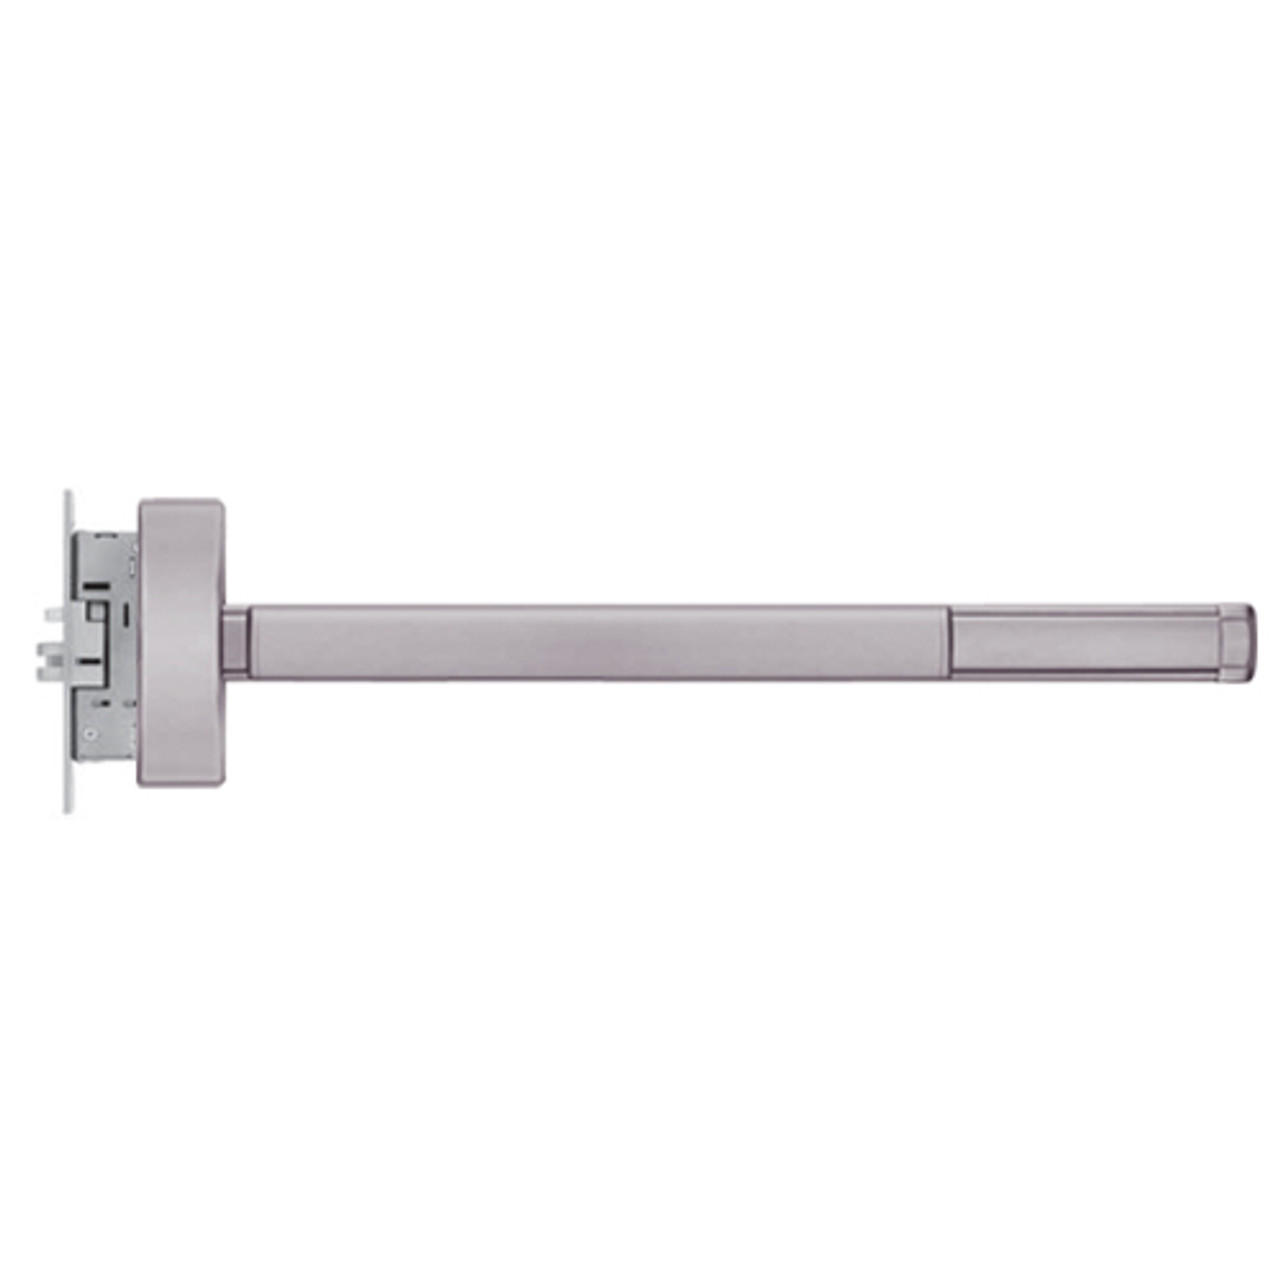 2301CD-LHR-630-48 PHI 2300 Series Non Fire Rated Apex Mortise Exit Device Prepped for Cover Plate with Cylinder Dogging in Satin Stainless Steel Finish